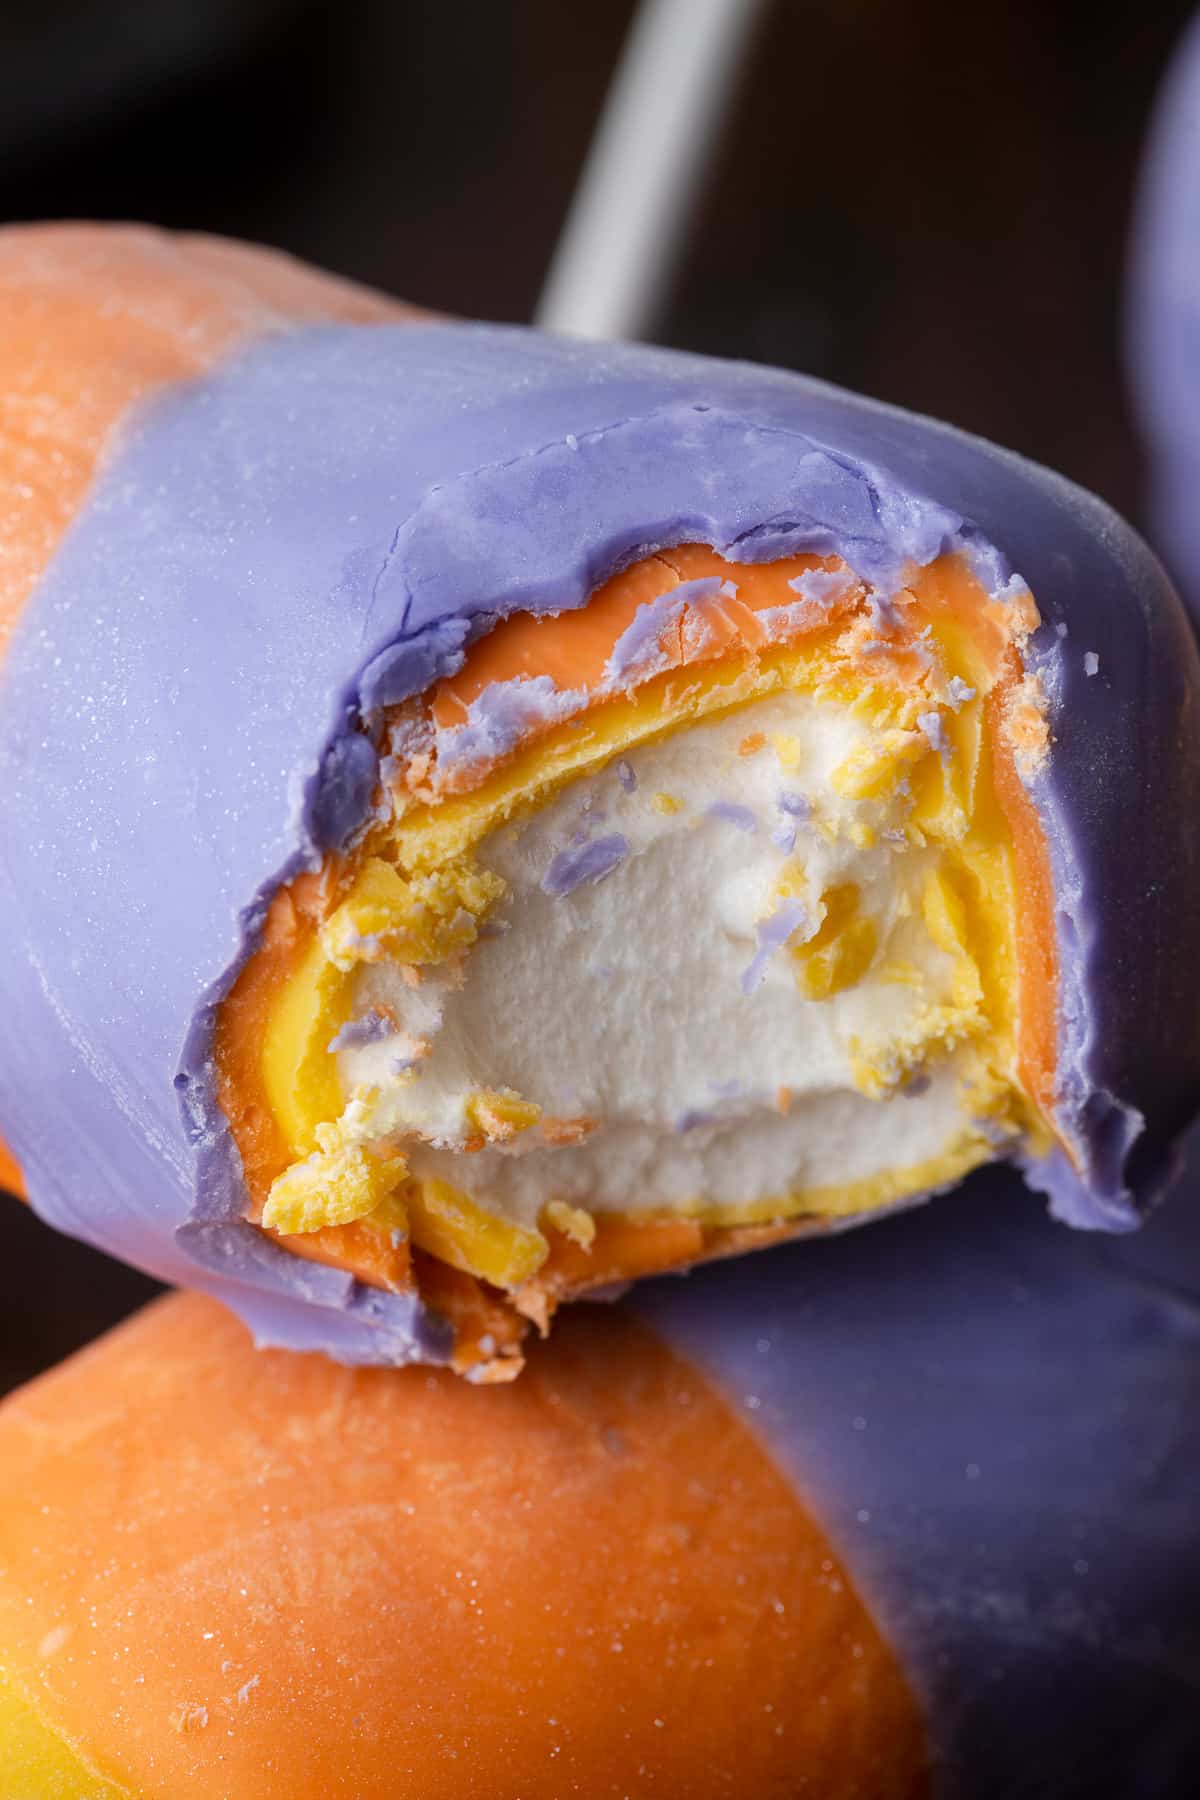 a bite taken out of a marshmallow pop covered in yellow, orange, and purple white chocolate.